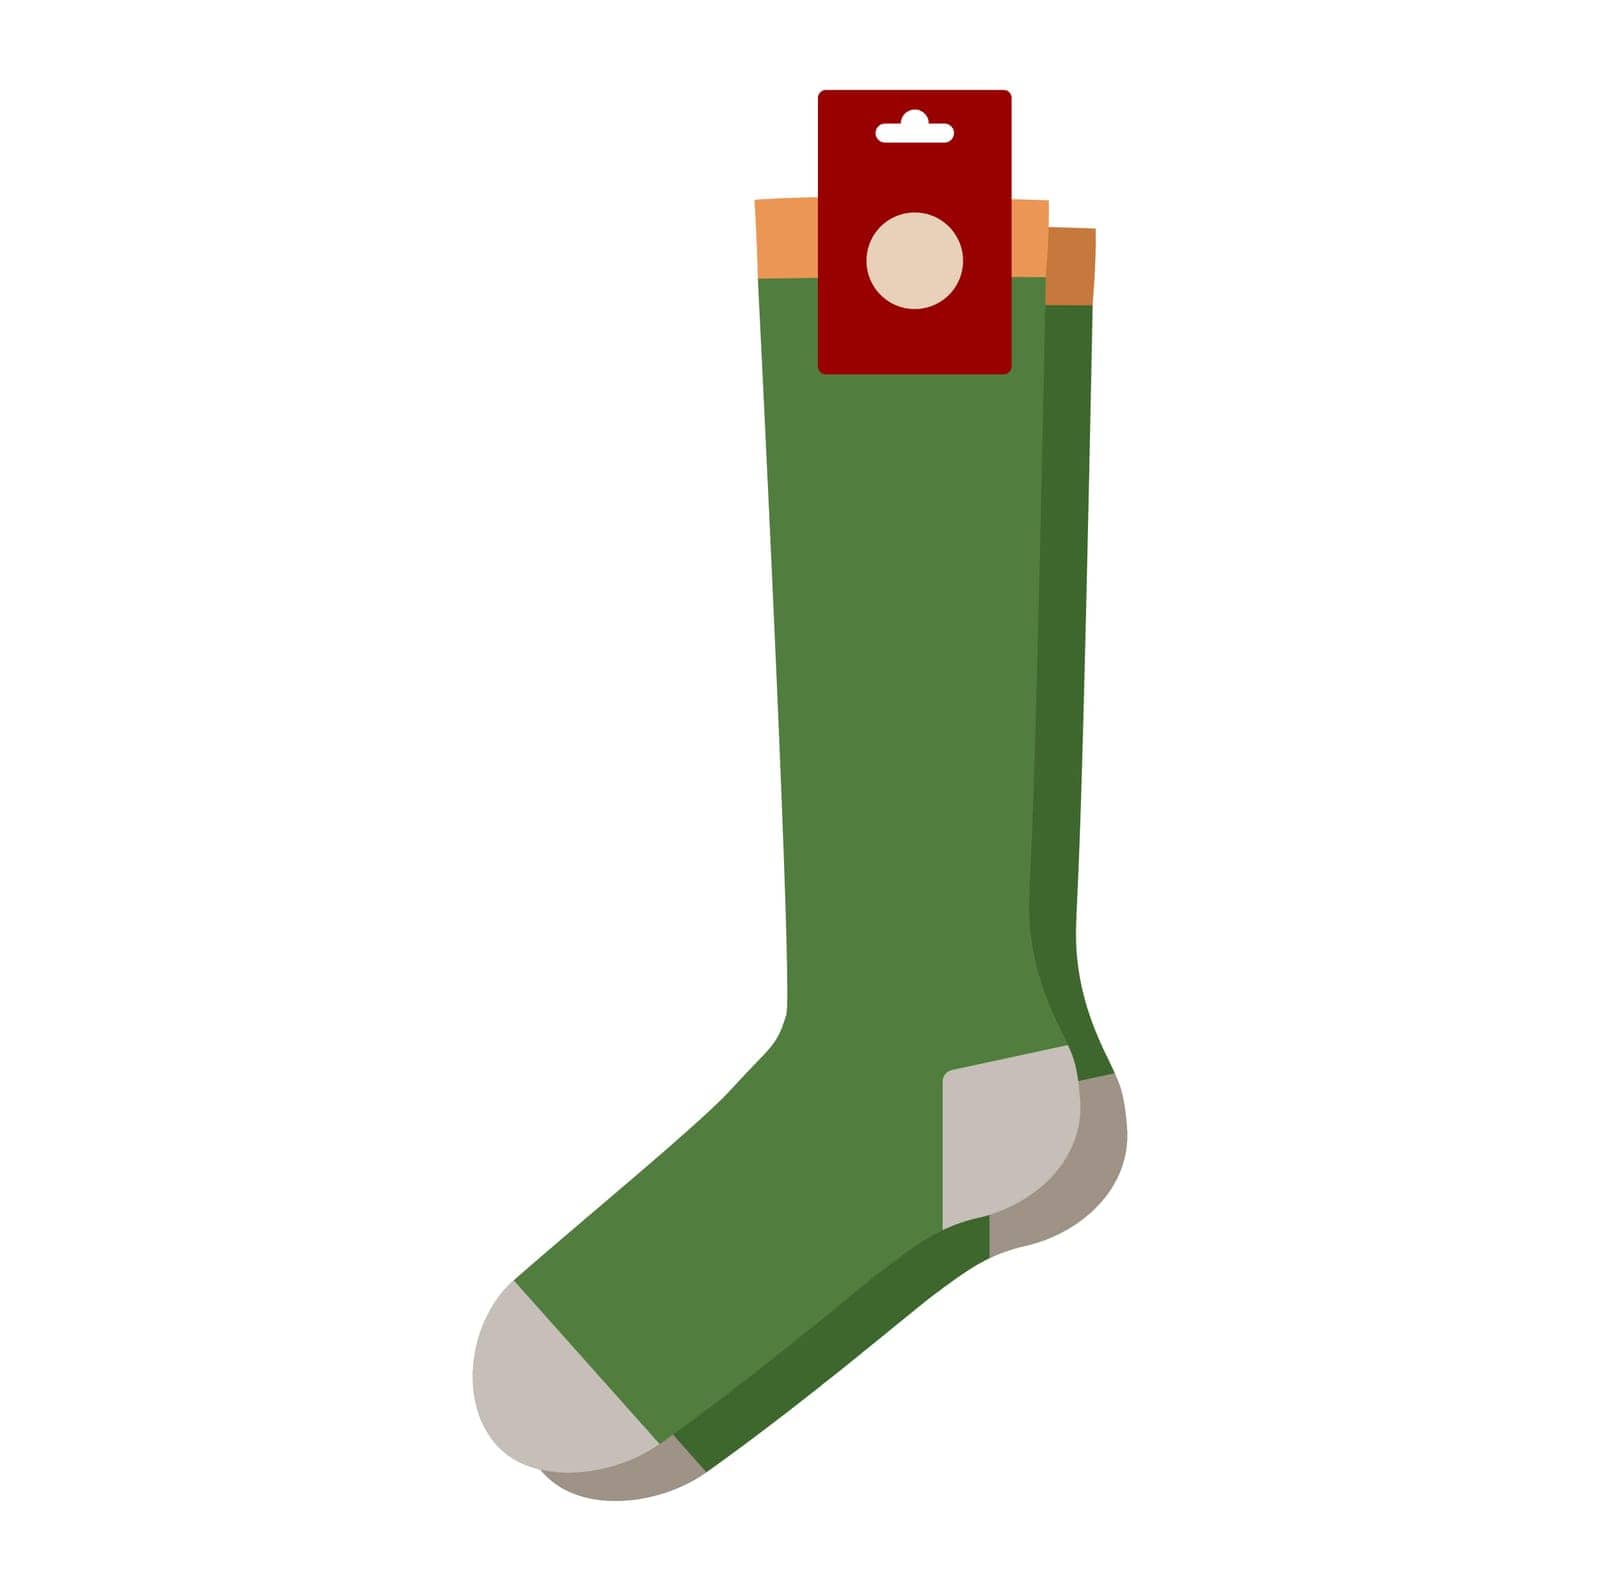 Green socks with logo tag hosiery crew length. Fashion accessory clothing technical illustration stocking. Vector by Vectoressa